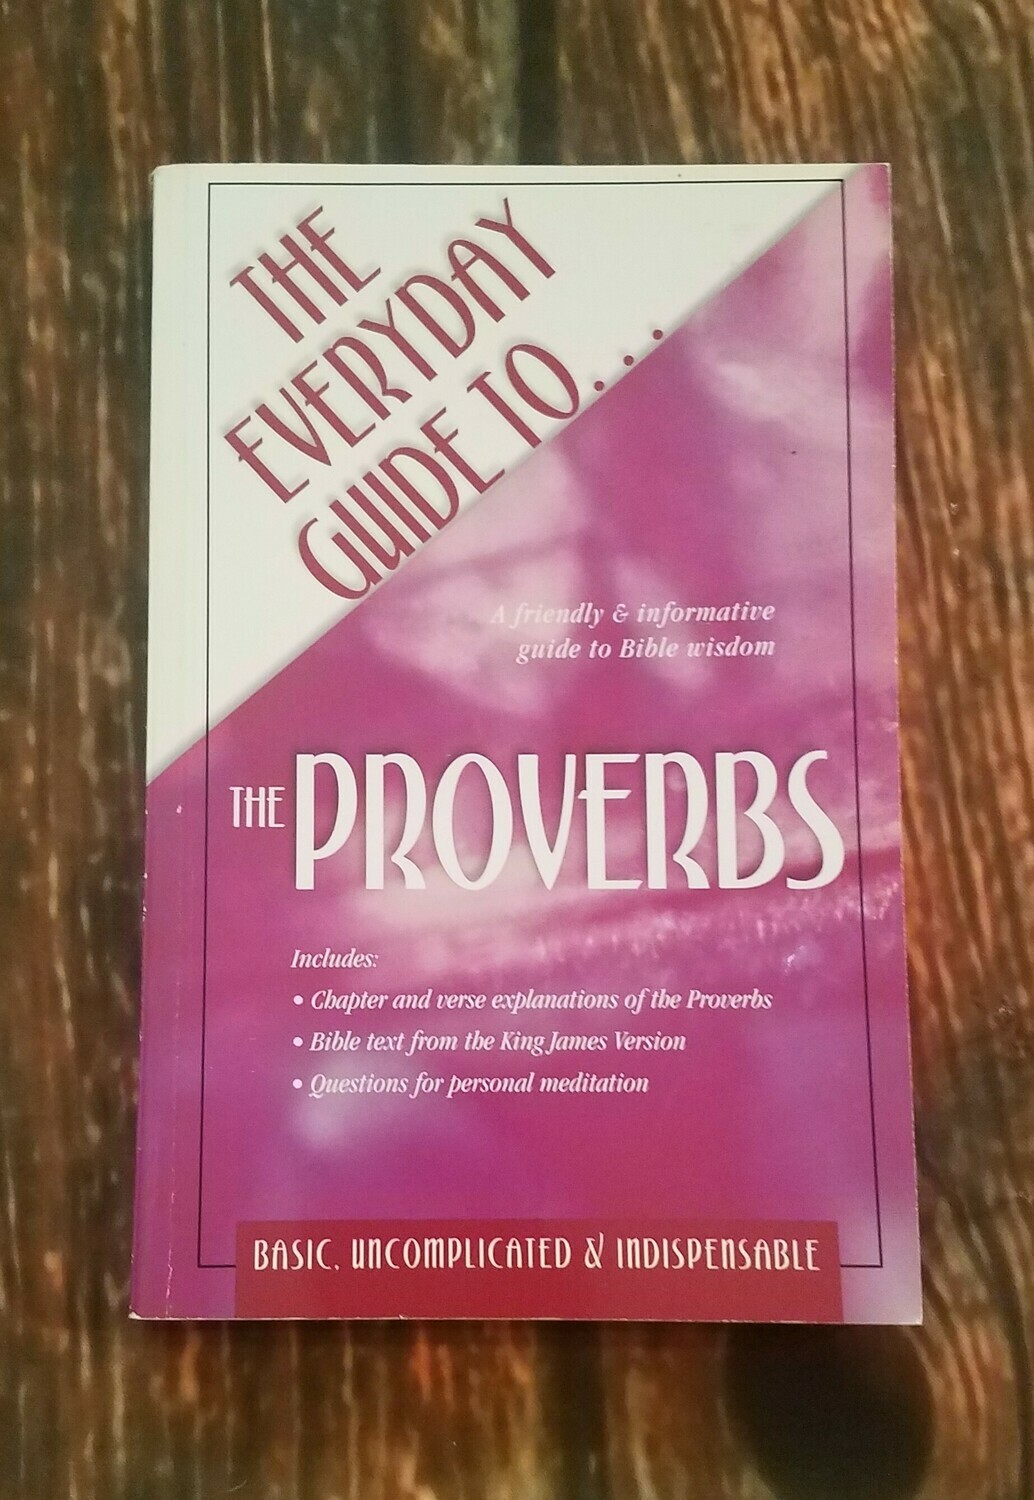 The Everyday Guide To....The Proverbs by Paul M. Miller